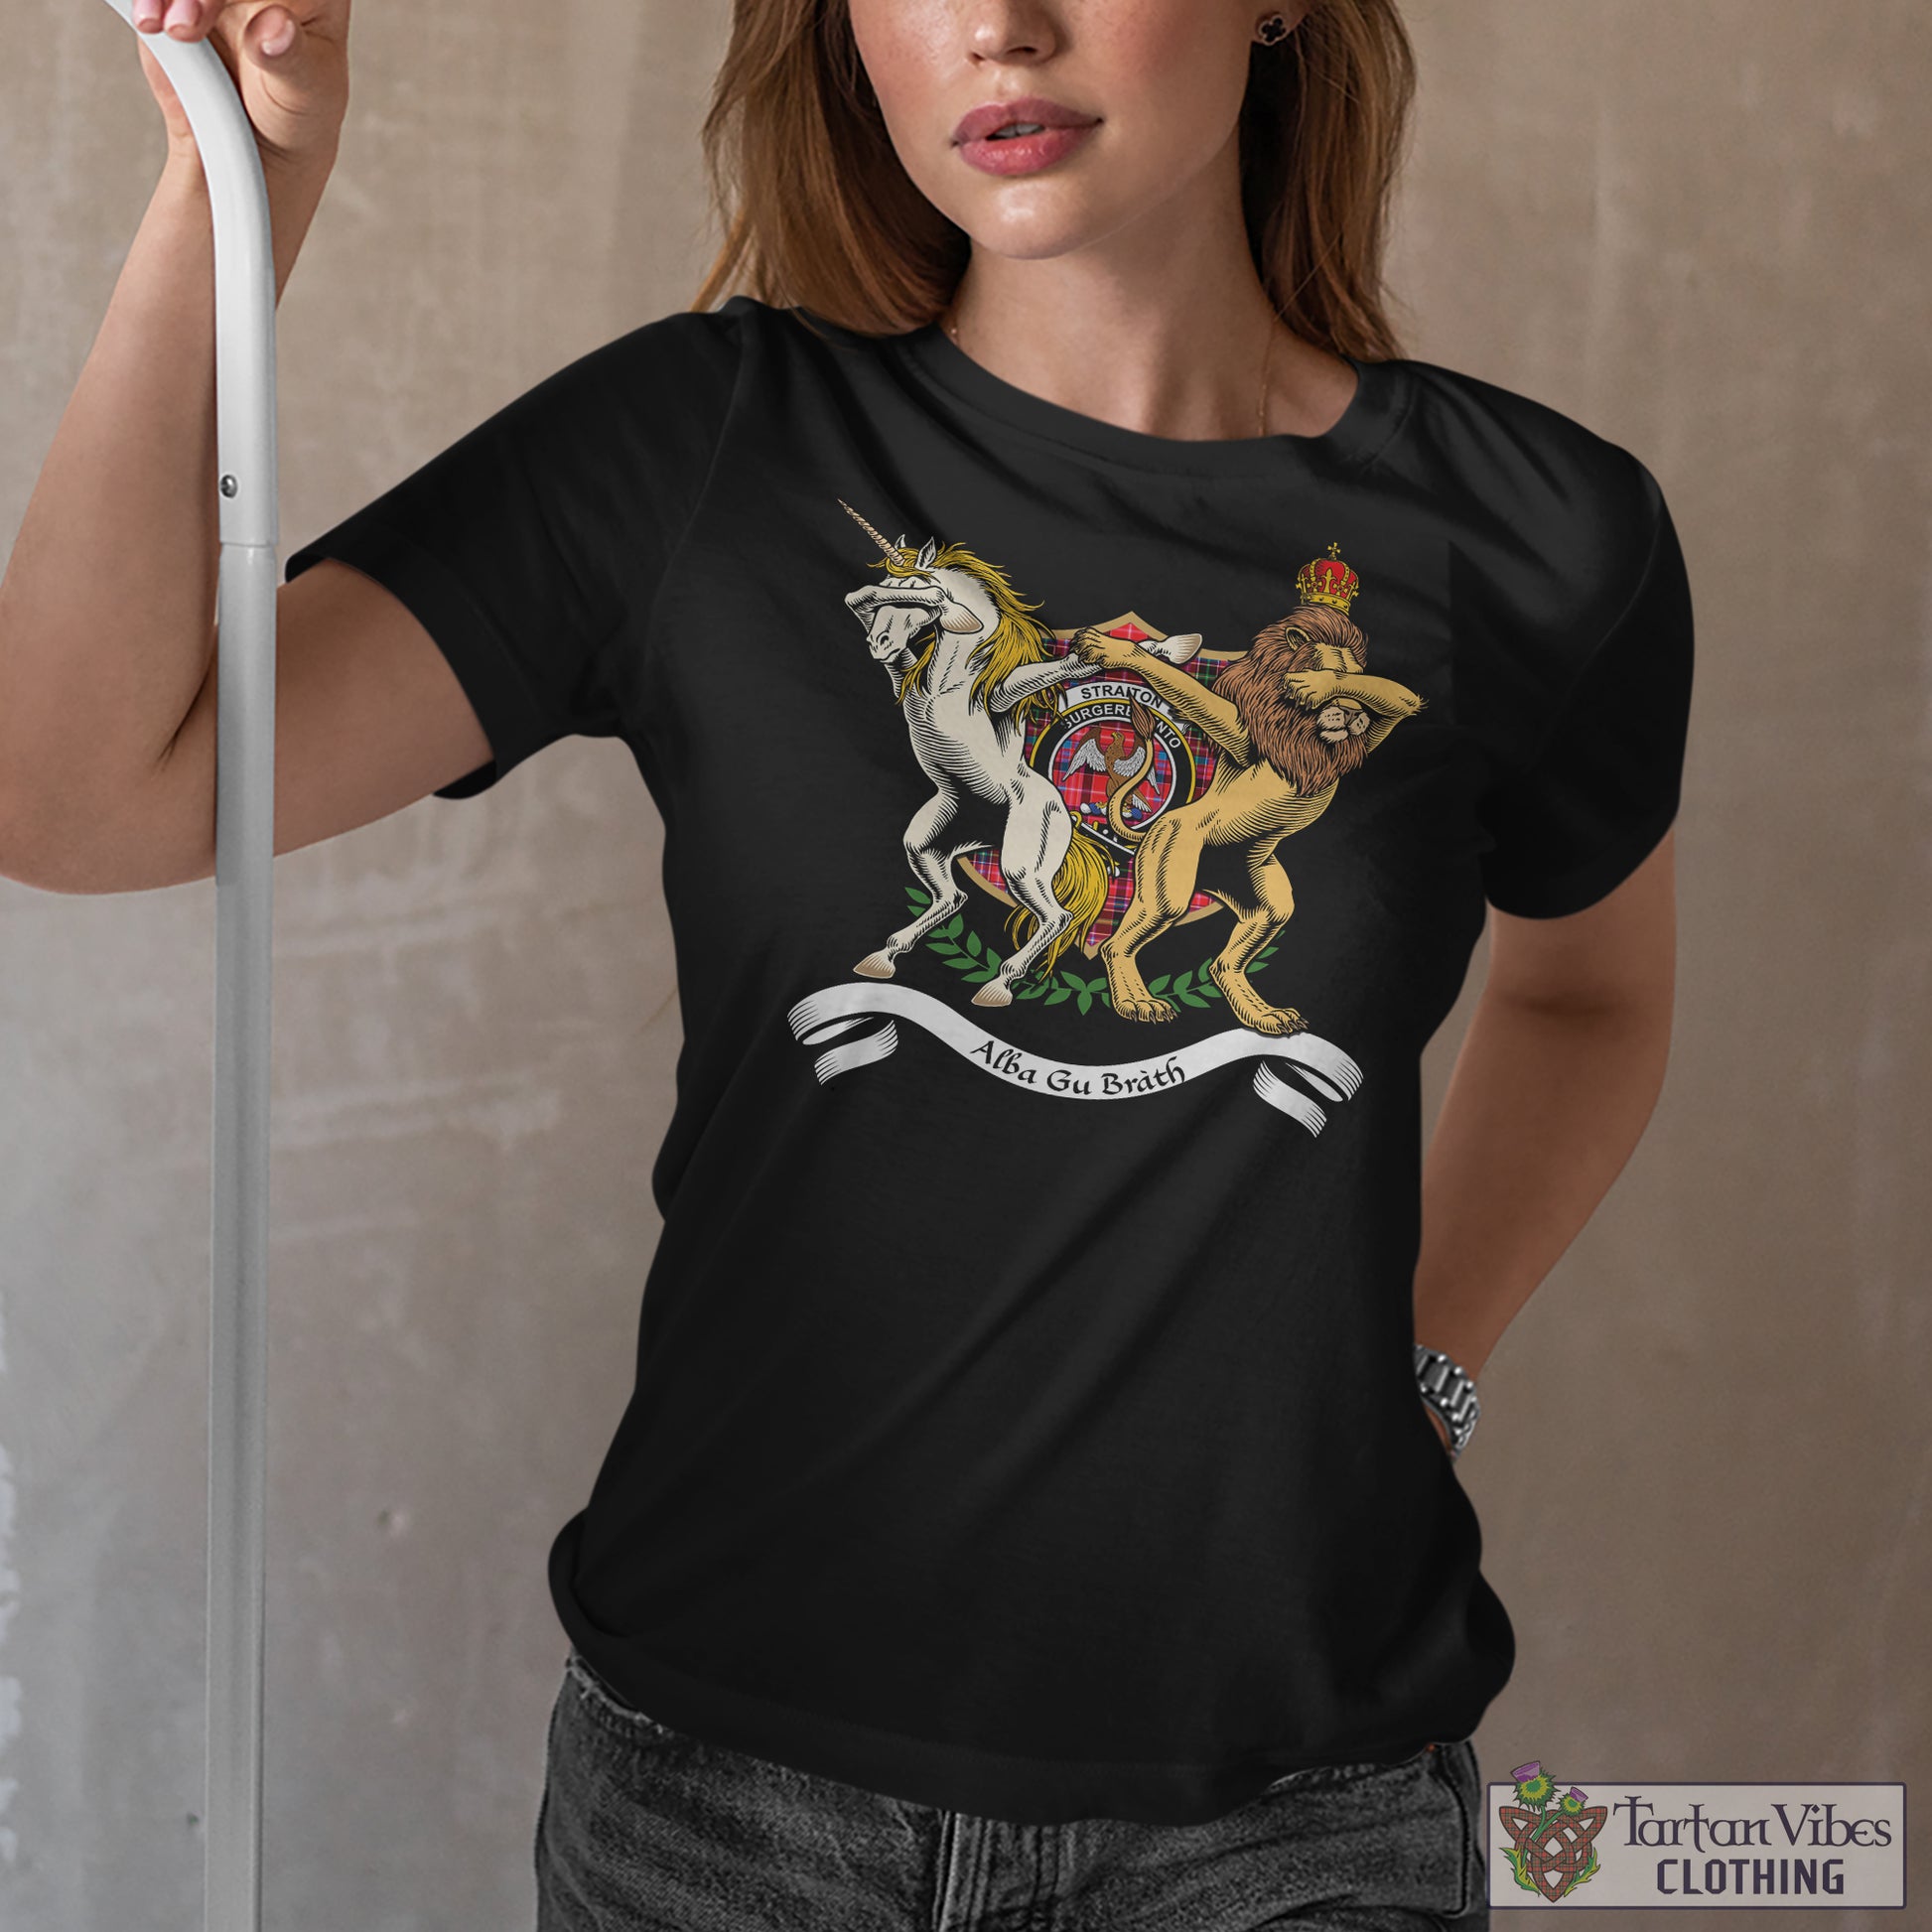 Tartan Vibes Clothing Straiton Family Crest Cotton Women's T-Shirt with Scotland Royal Coat Of Arm Funny Style